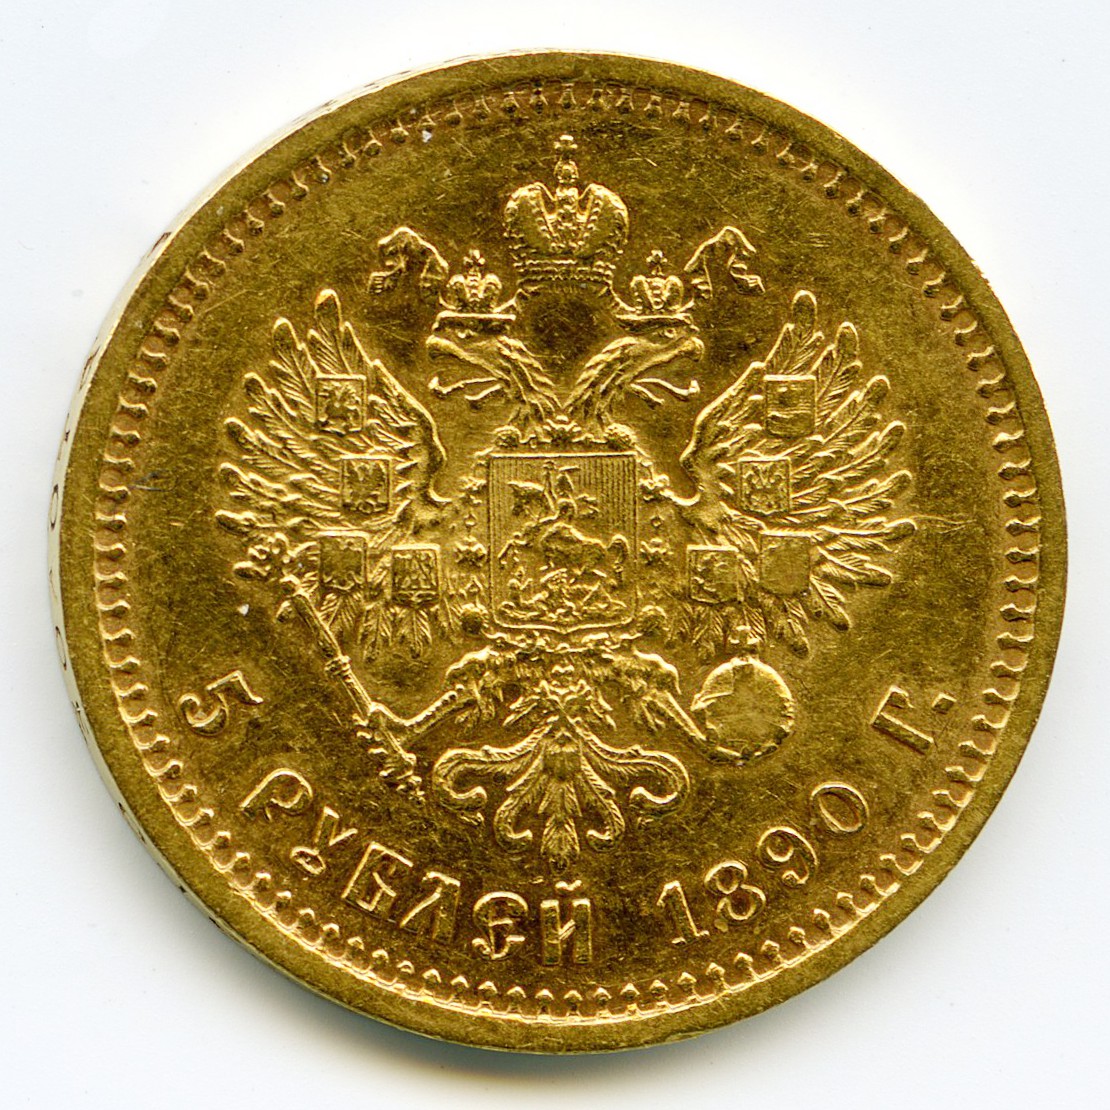 Russie - 5 Roubles - 1890 revers